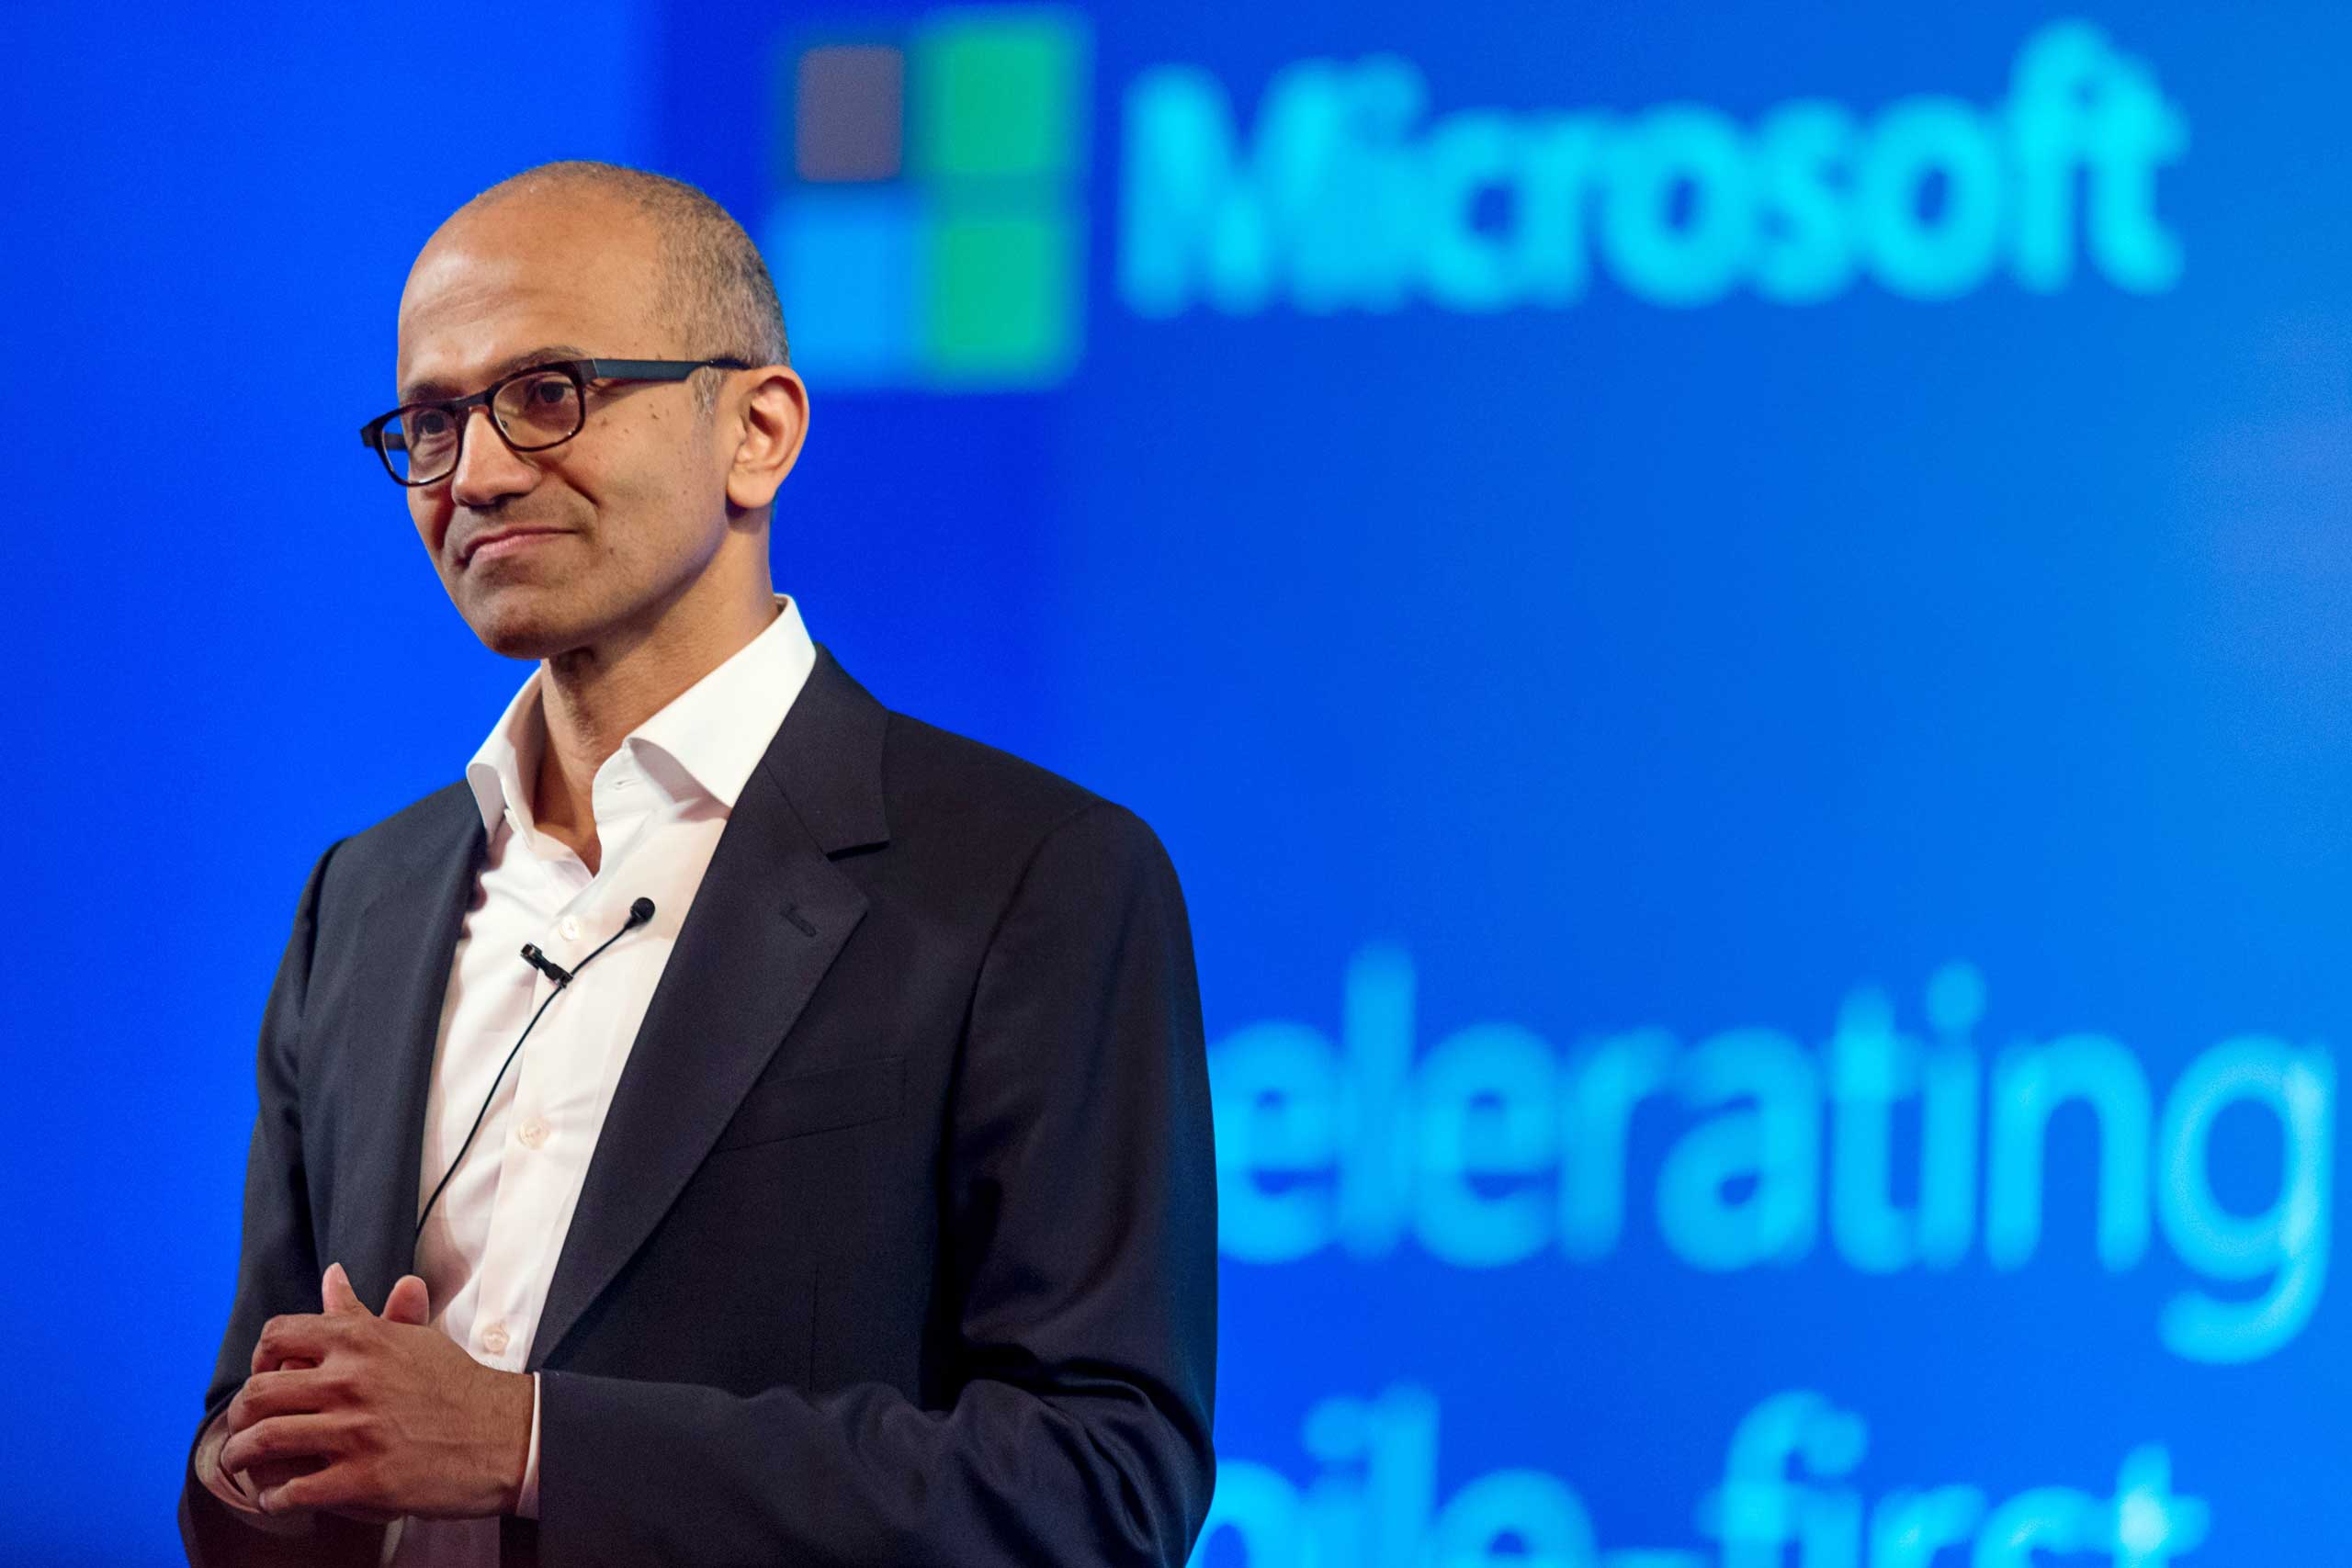 Satya Nadella, chief executive officer of Microsoft Corp., speaks during a news conference in New Delhi, India, on Sept. 30, 2014. (Bloomberg/Getty Images)